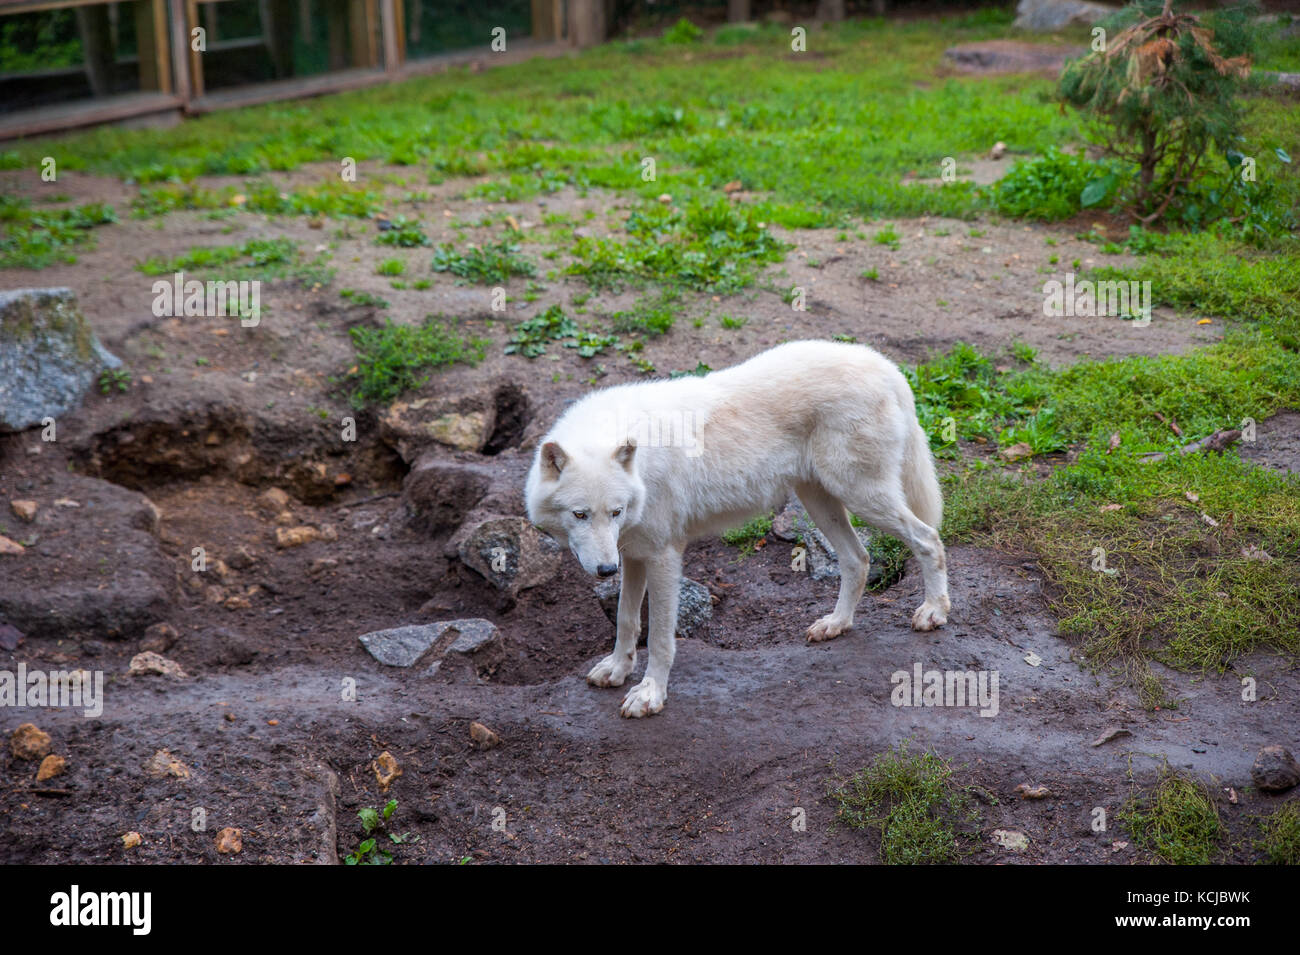 Wild, white wolfes eating their food during the feeding time in a zoo Stock Photo